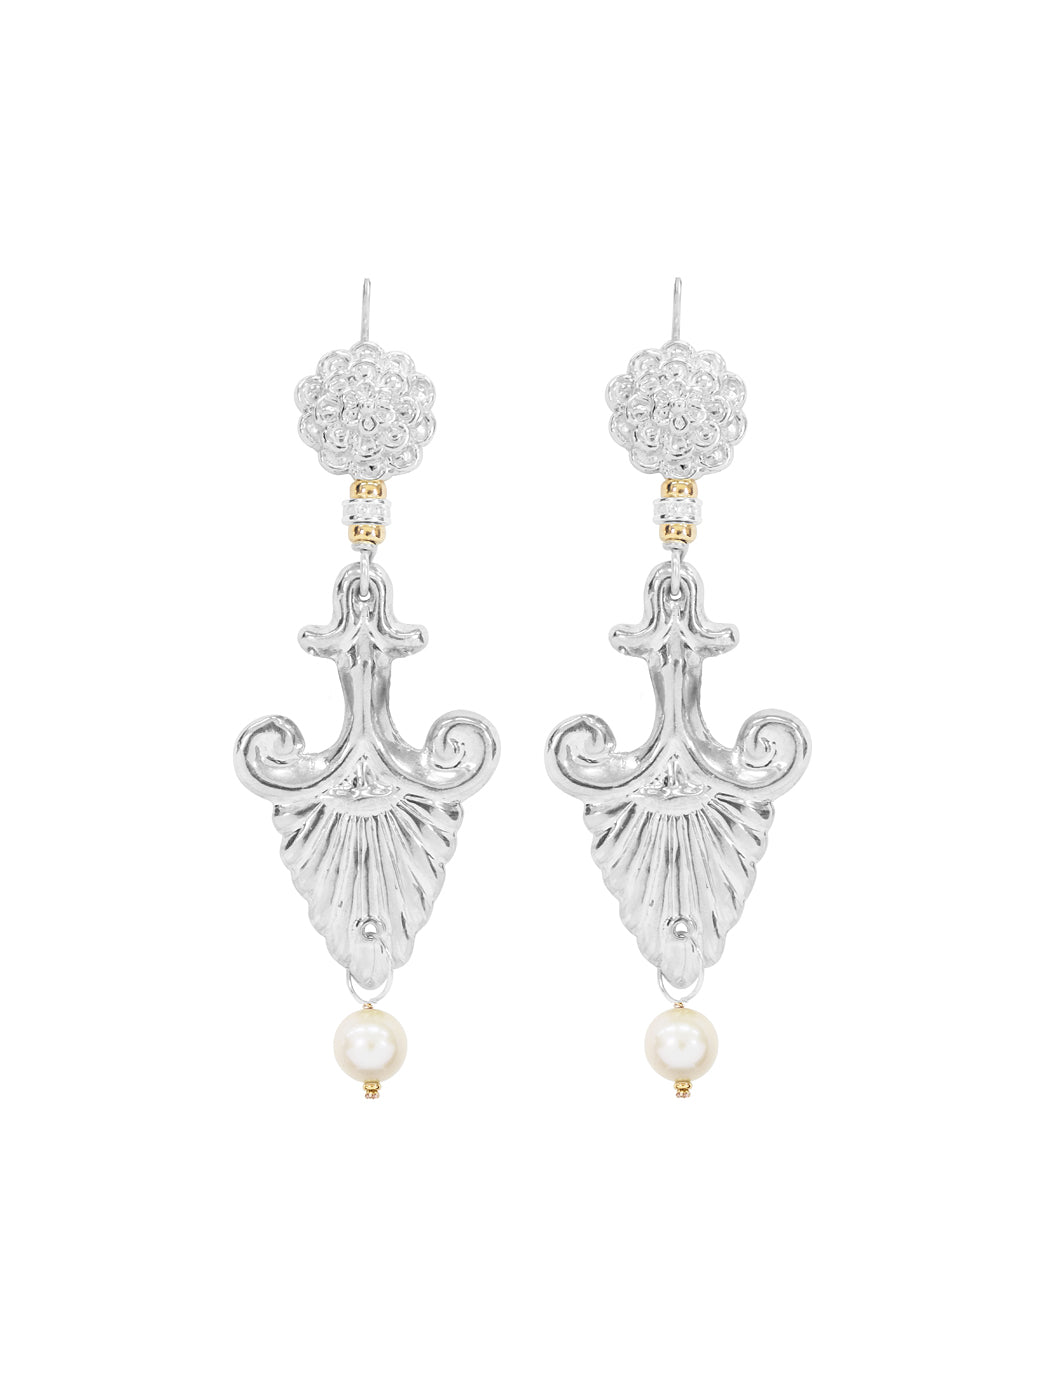 Fiorina Jewellery Silver Noto earrings White Pearl Highlights